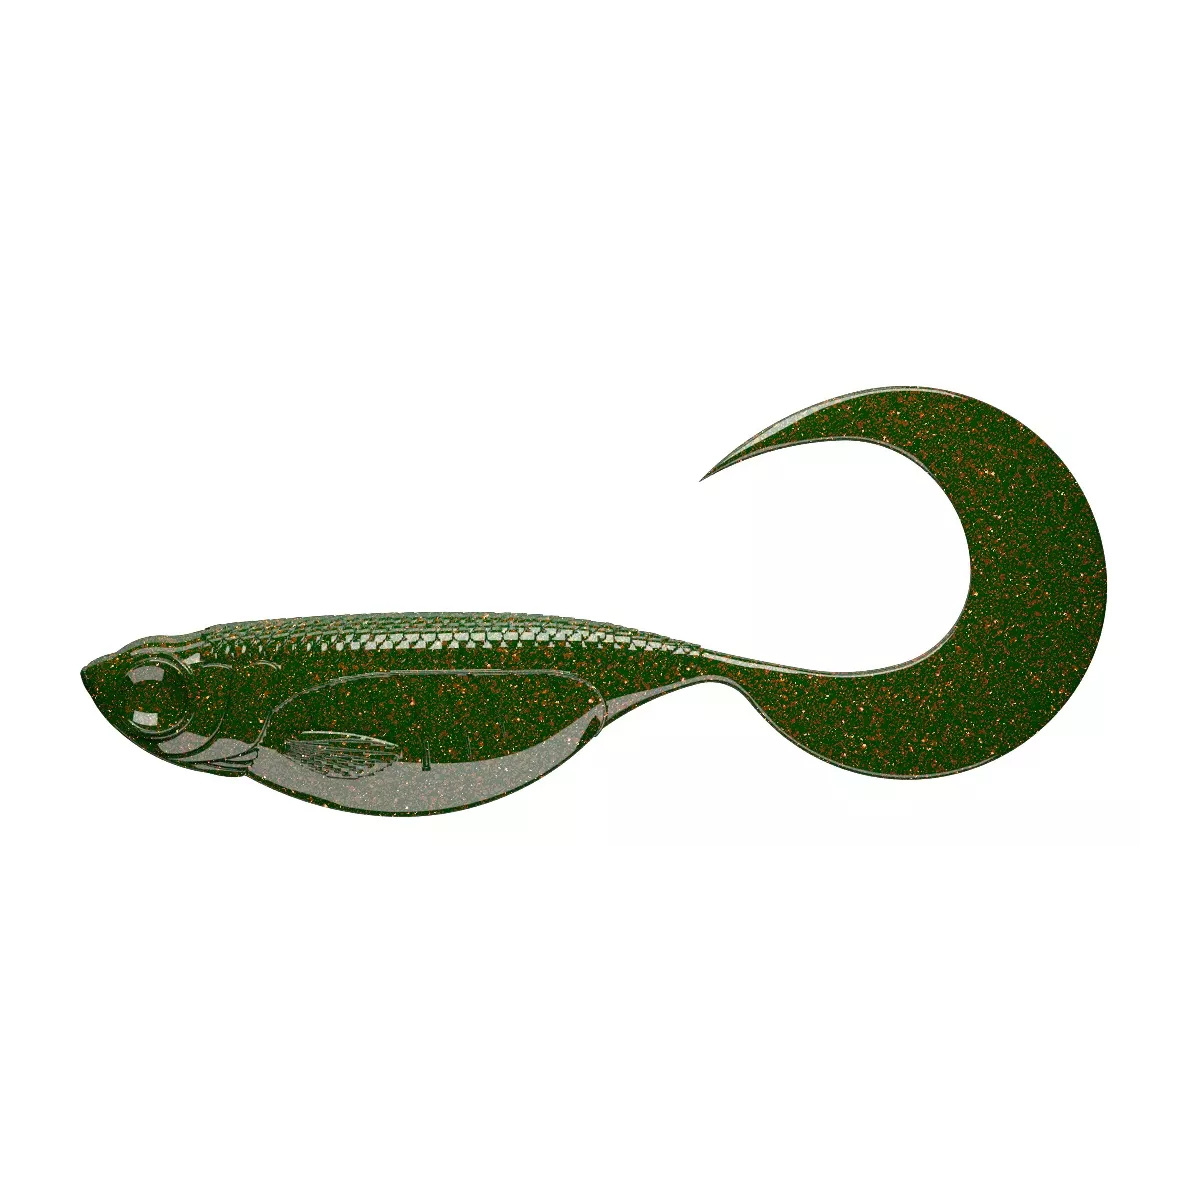 Libra Lures Embrion Twist Tail 1.75'' 4.5cm - 032 / MOTOR OIL GREEN